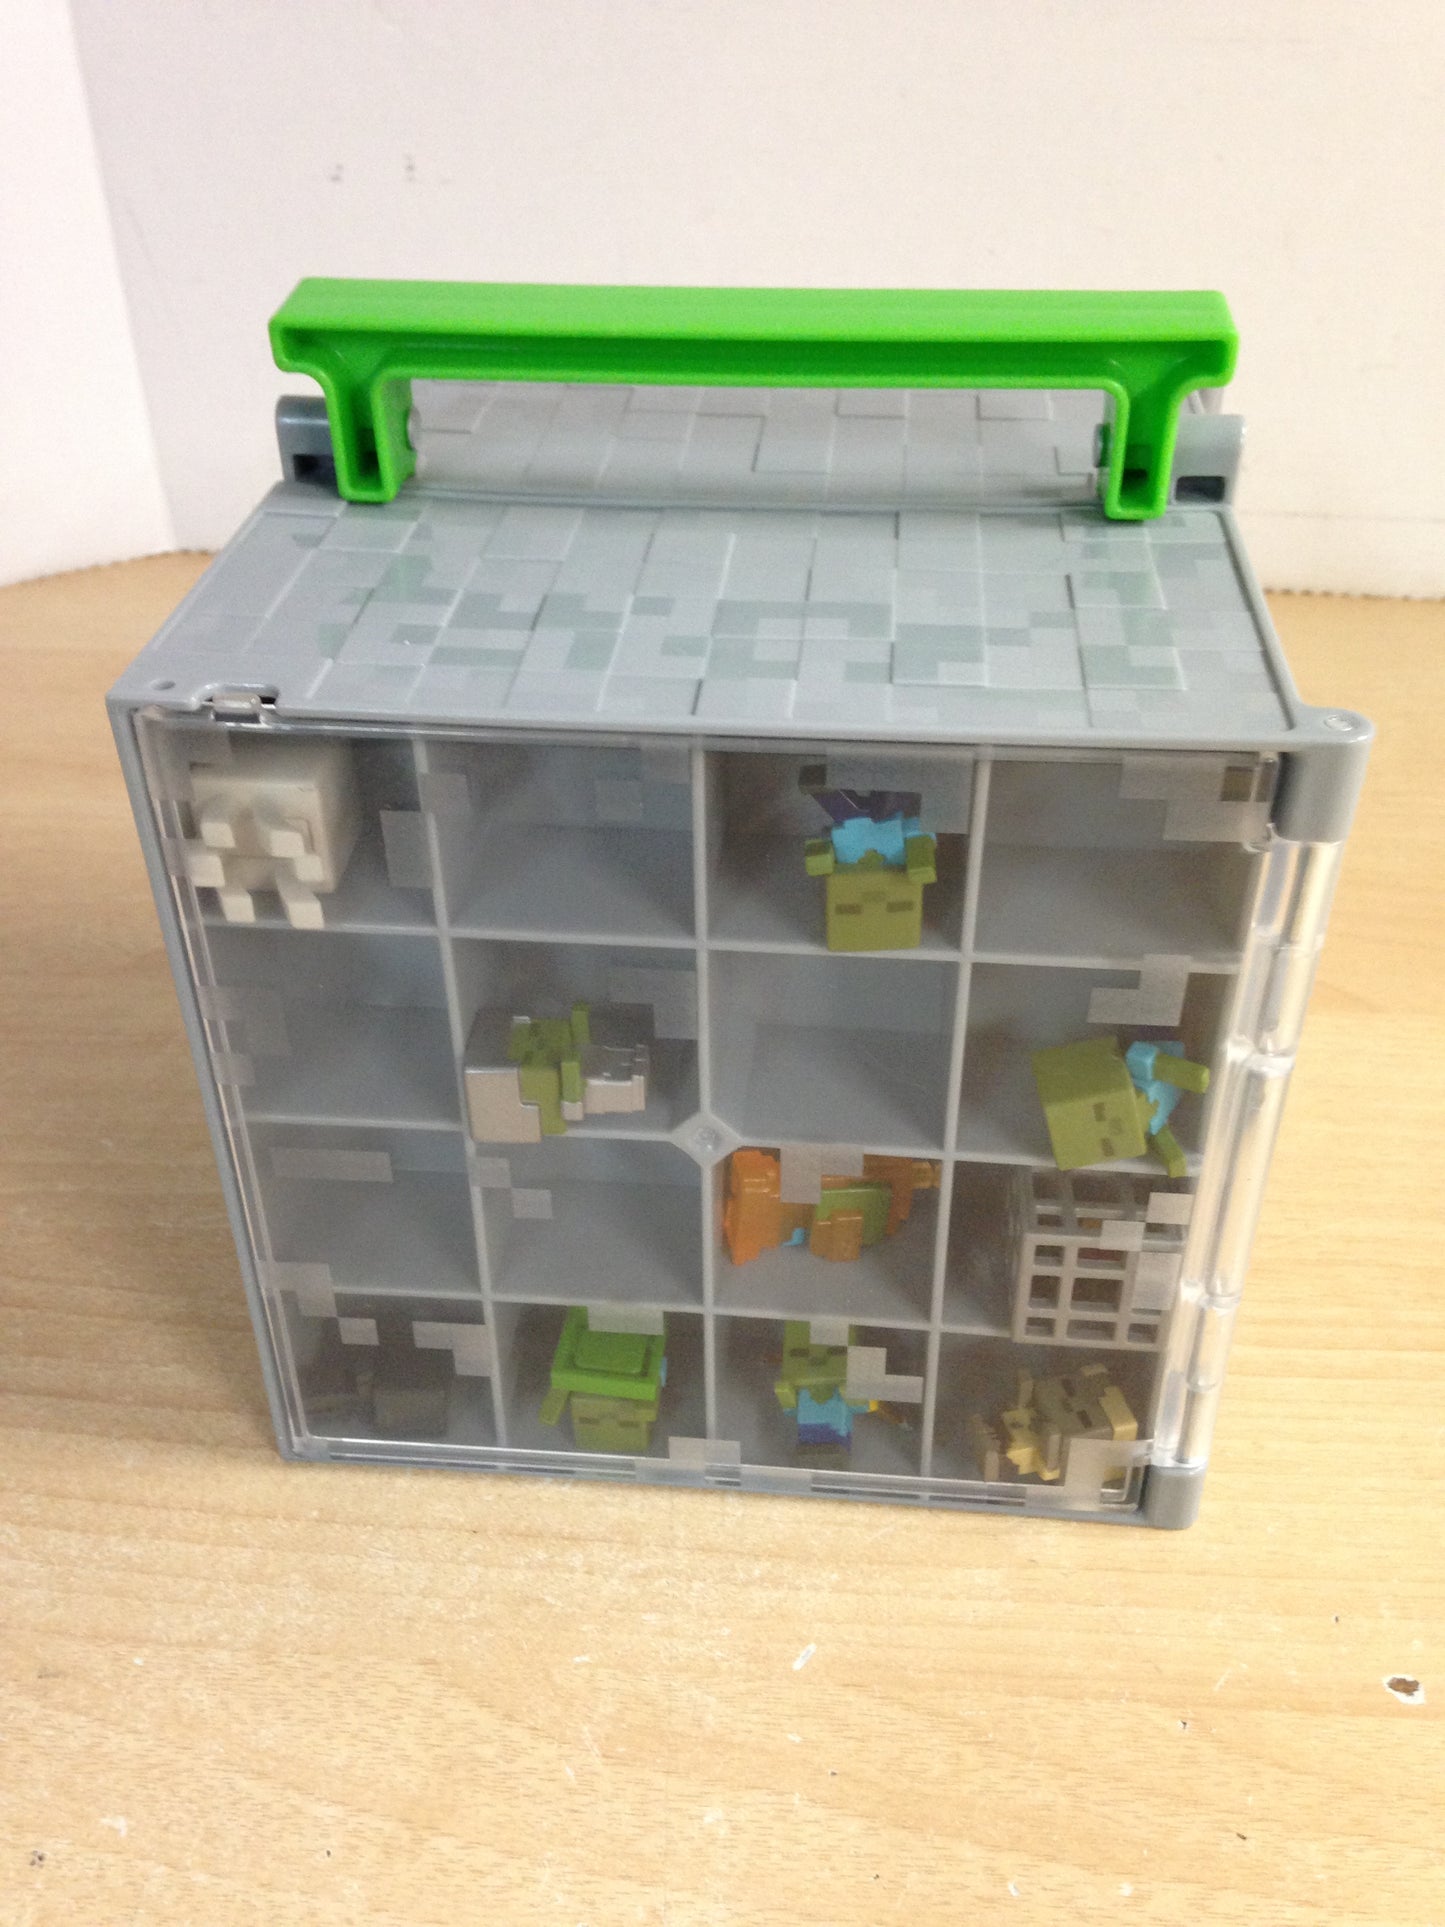 Lego Minecraft Mini Figure Collectors Case Opens For Pay Set With 17 Mini Figures Excellent